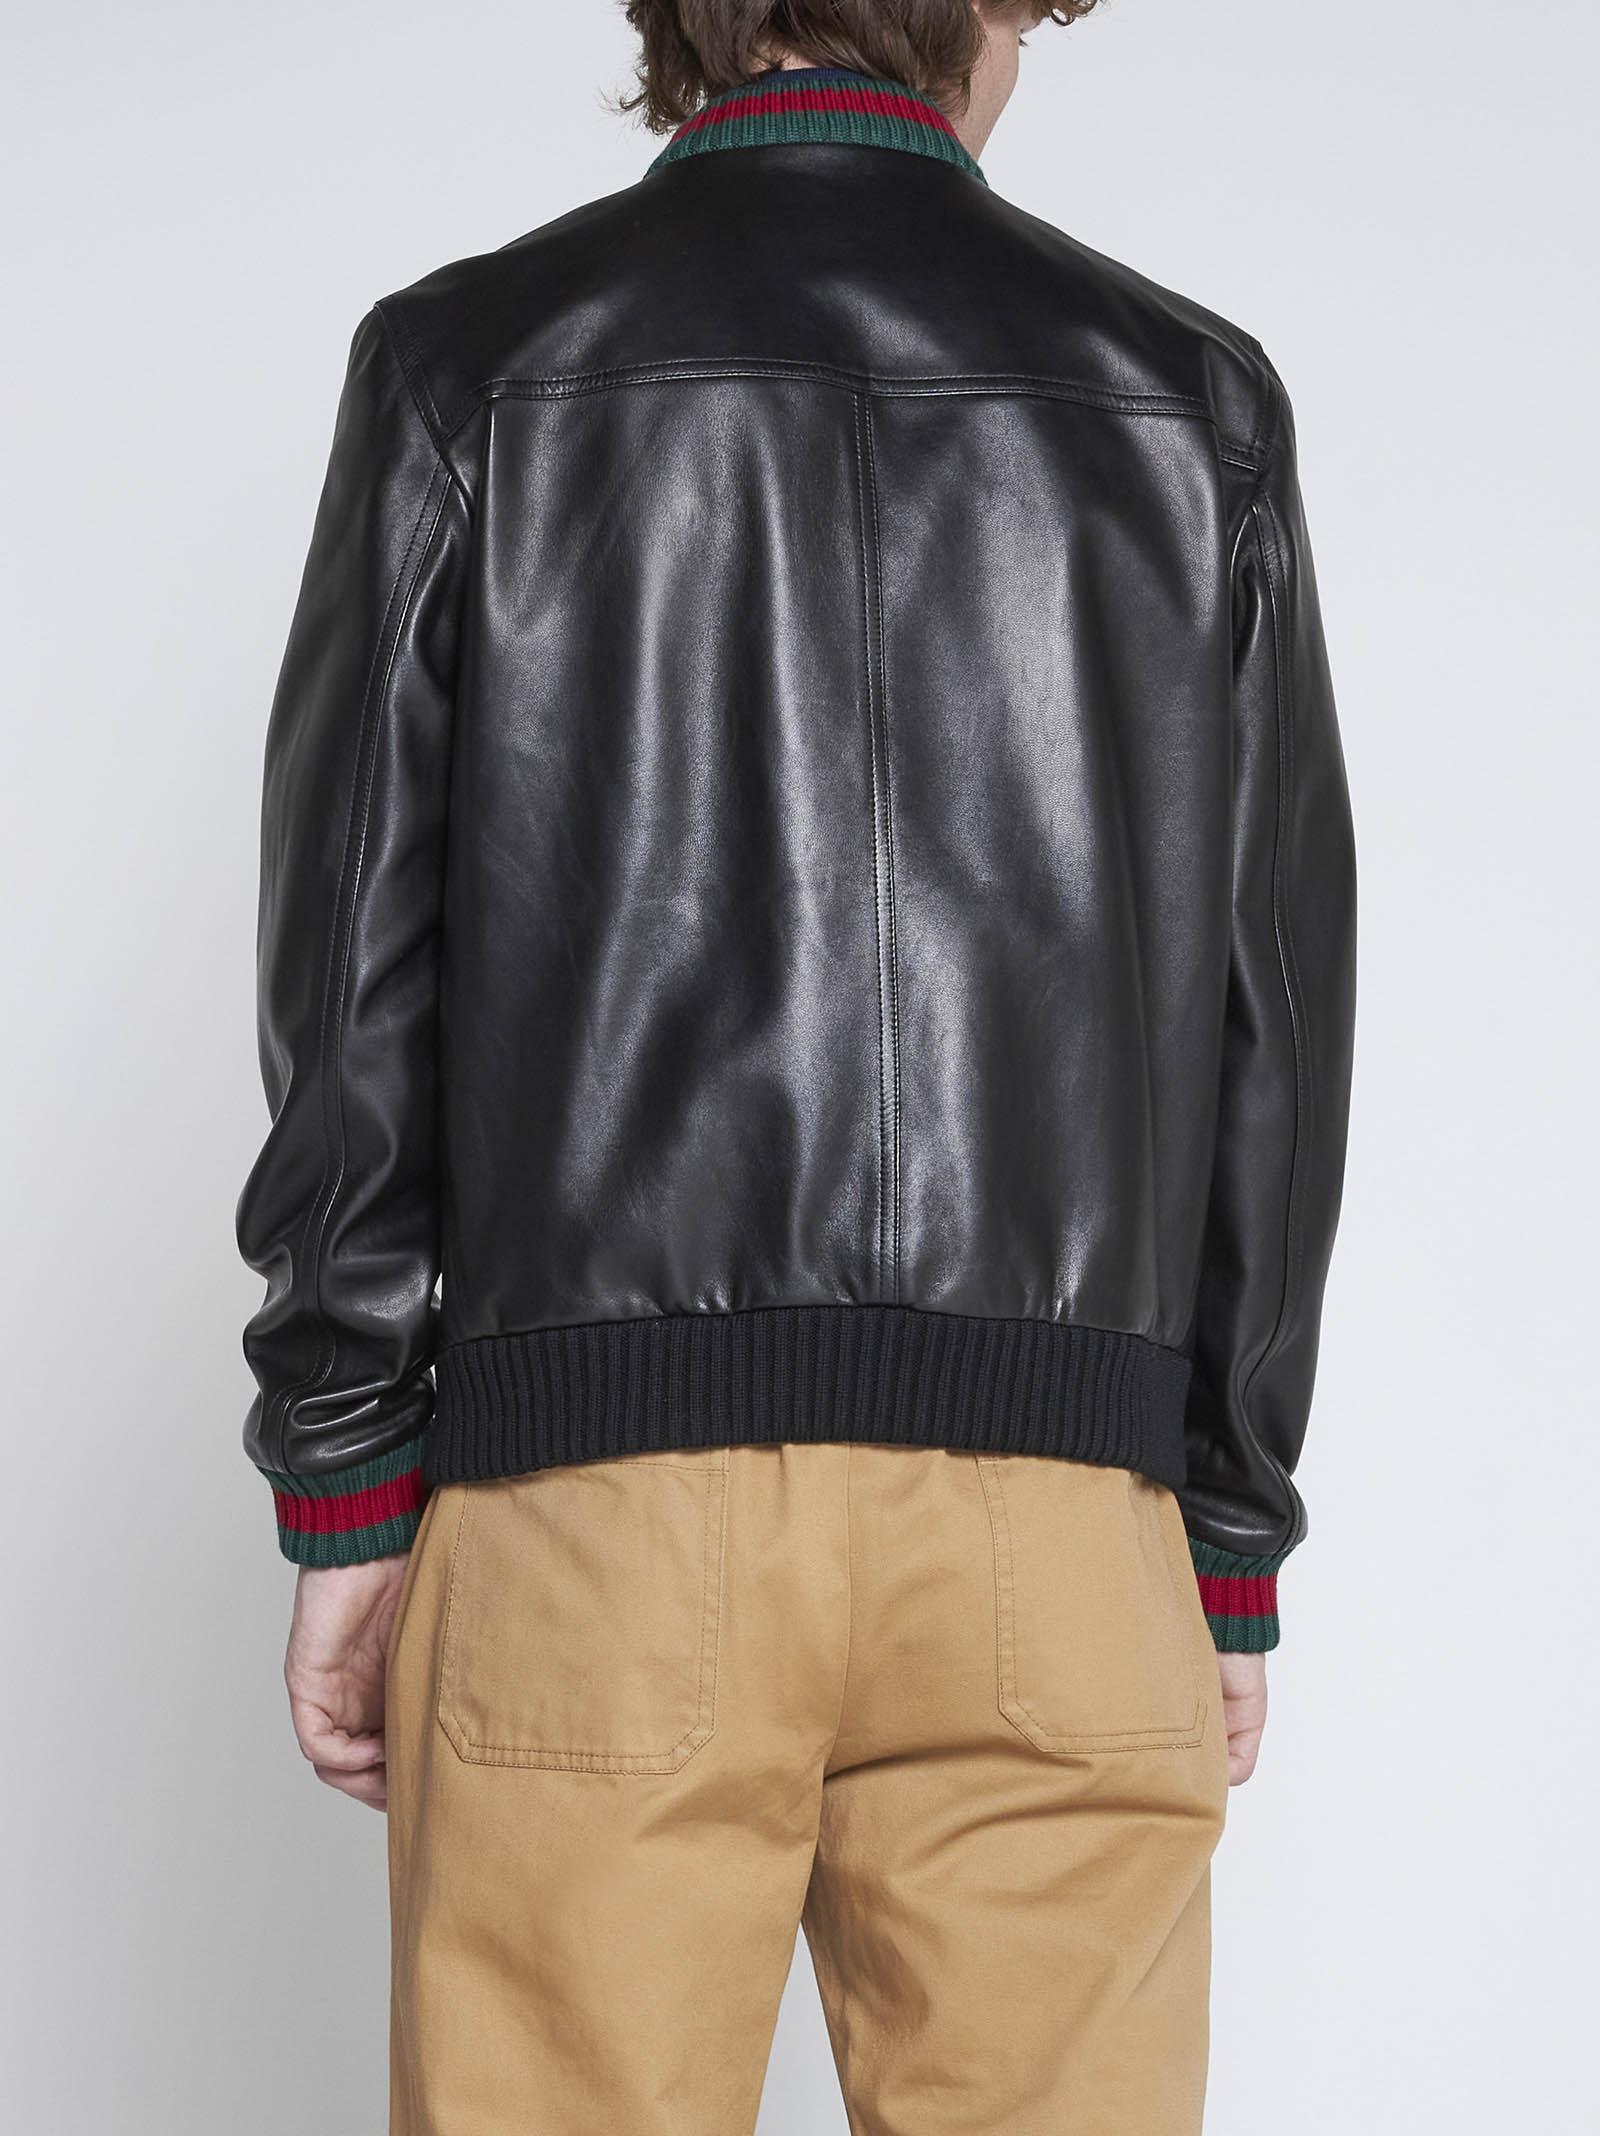 Gucci Men's GG Embossed Leather Jacket